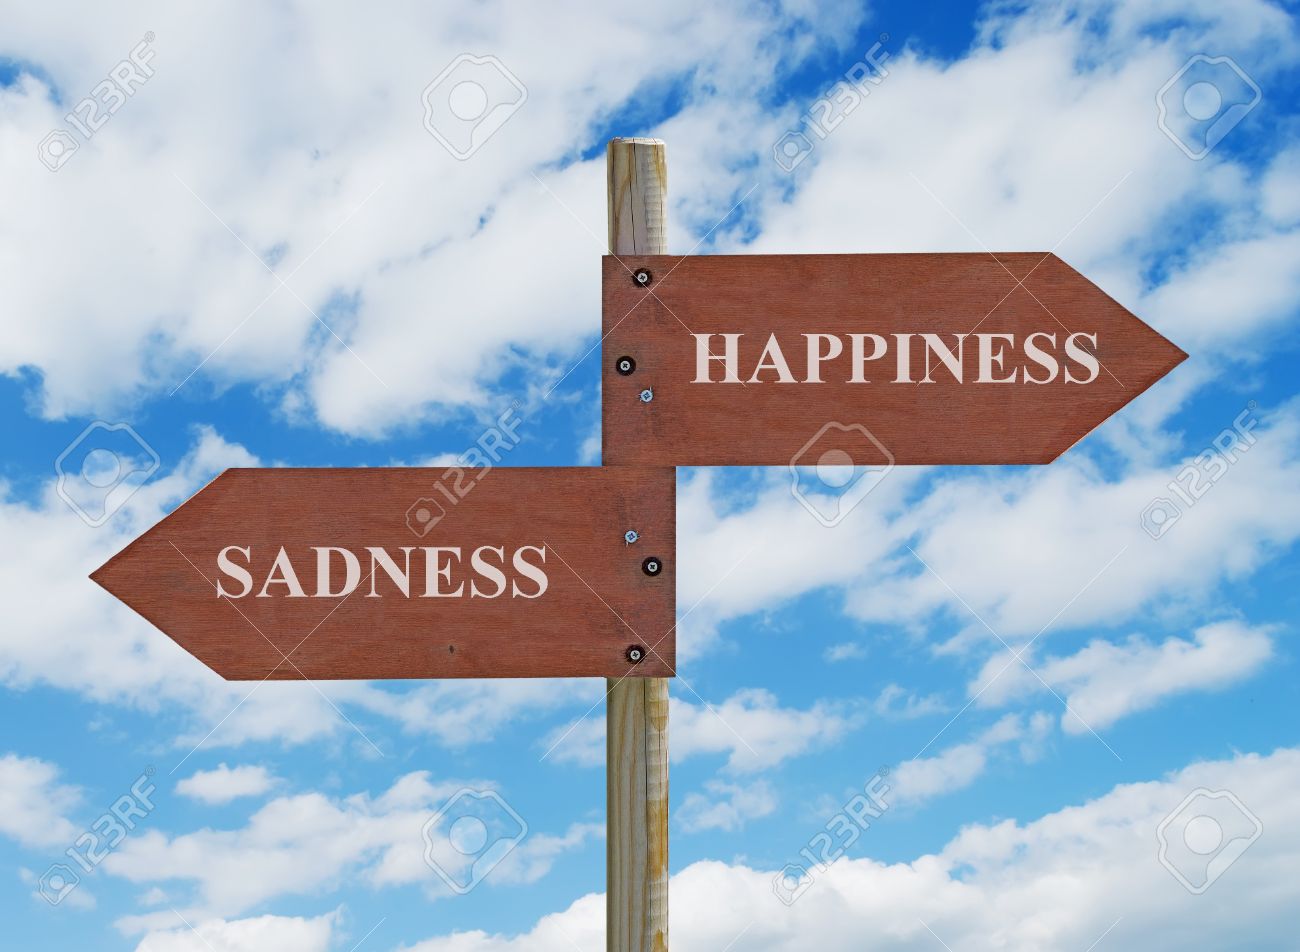 18917475-wooden-crossroad-sign-on-cloudy-background-with-happiness-vs-sadness-writing-Stock-Photo